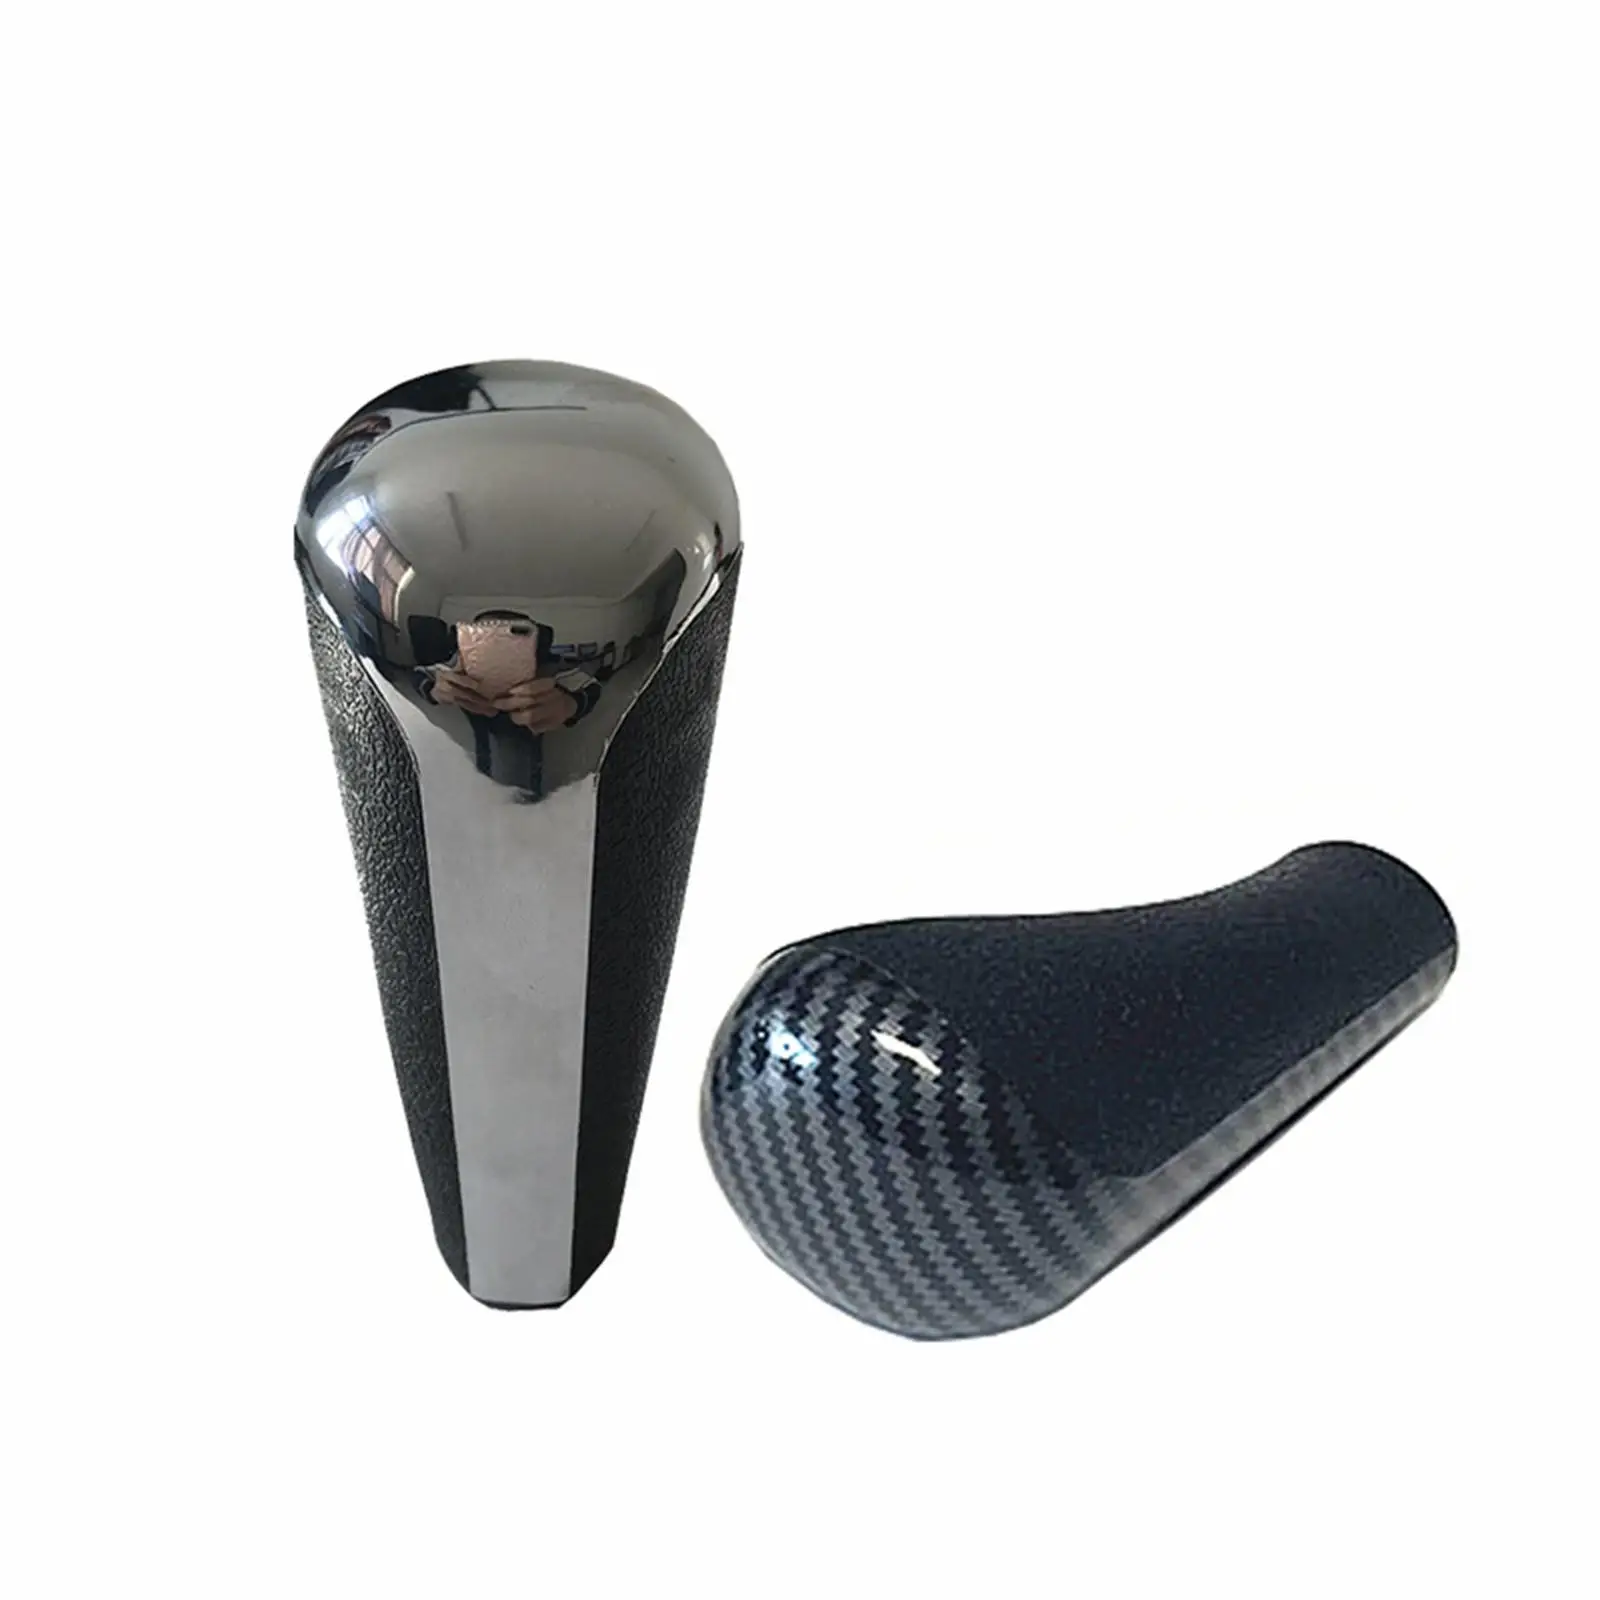 Gear Shifter Head Carbon Fiber Pattern Ball Head for Peugeot 206 207 307 Car Styling Auto Parts Accessories Car Supplies